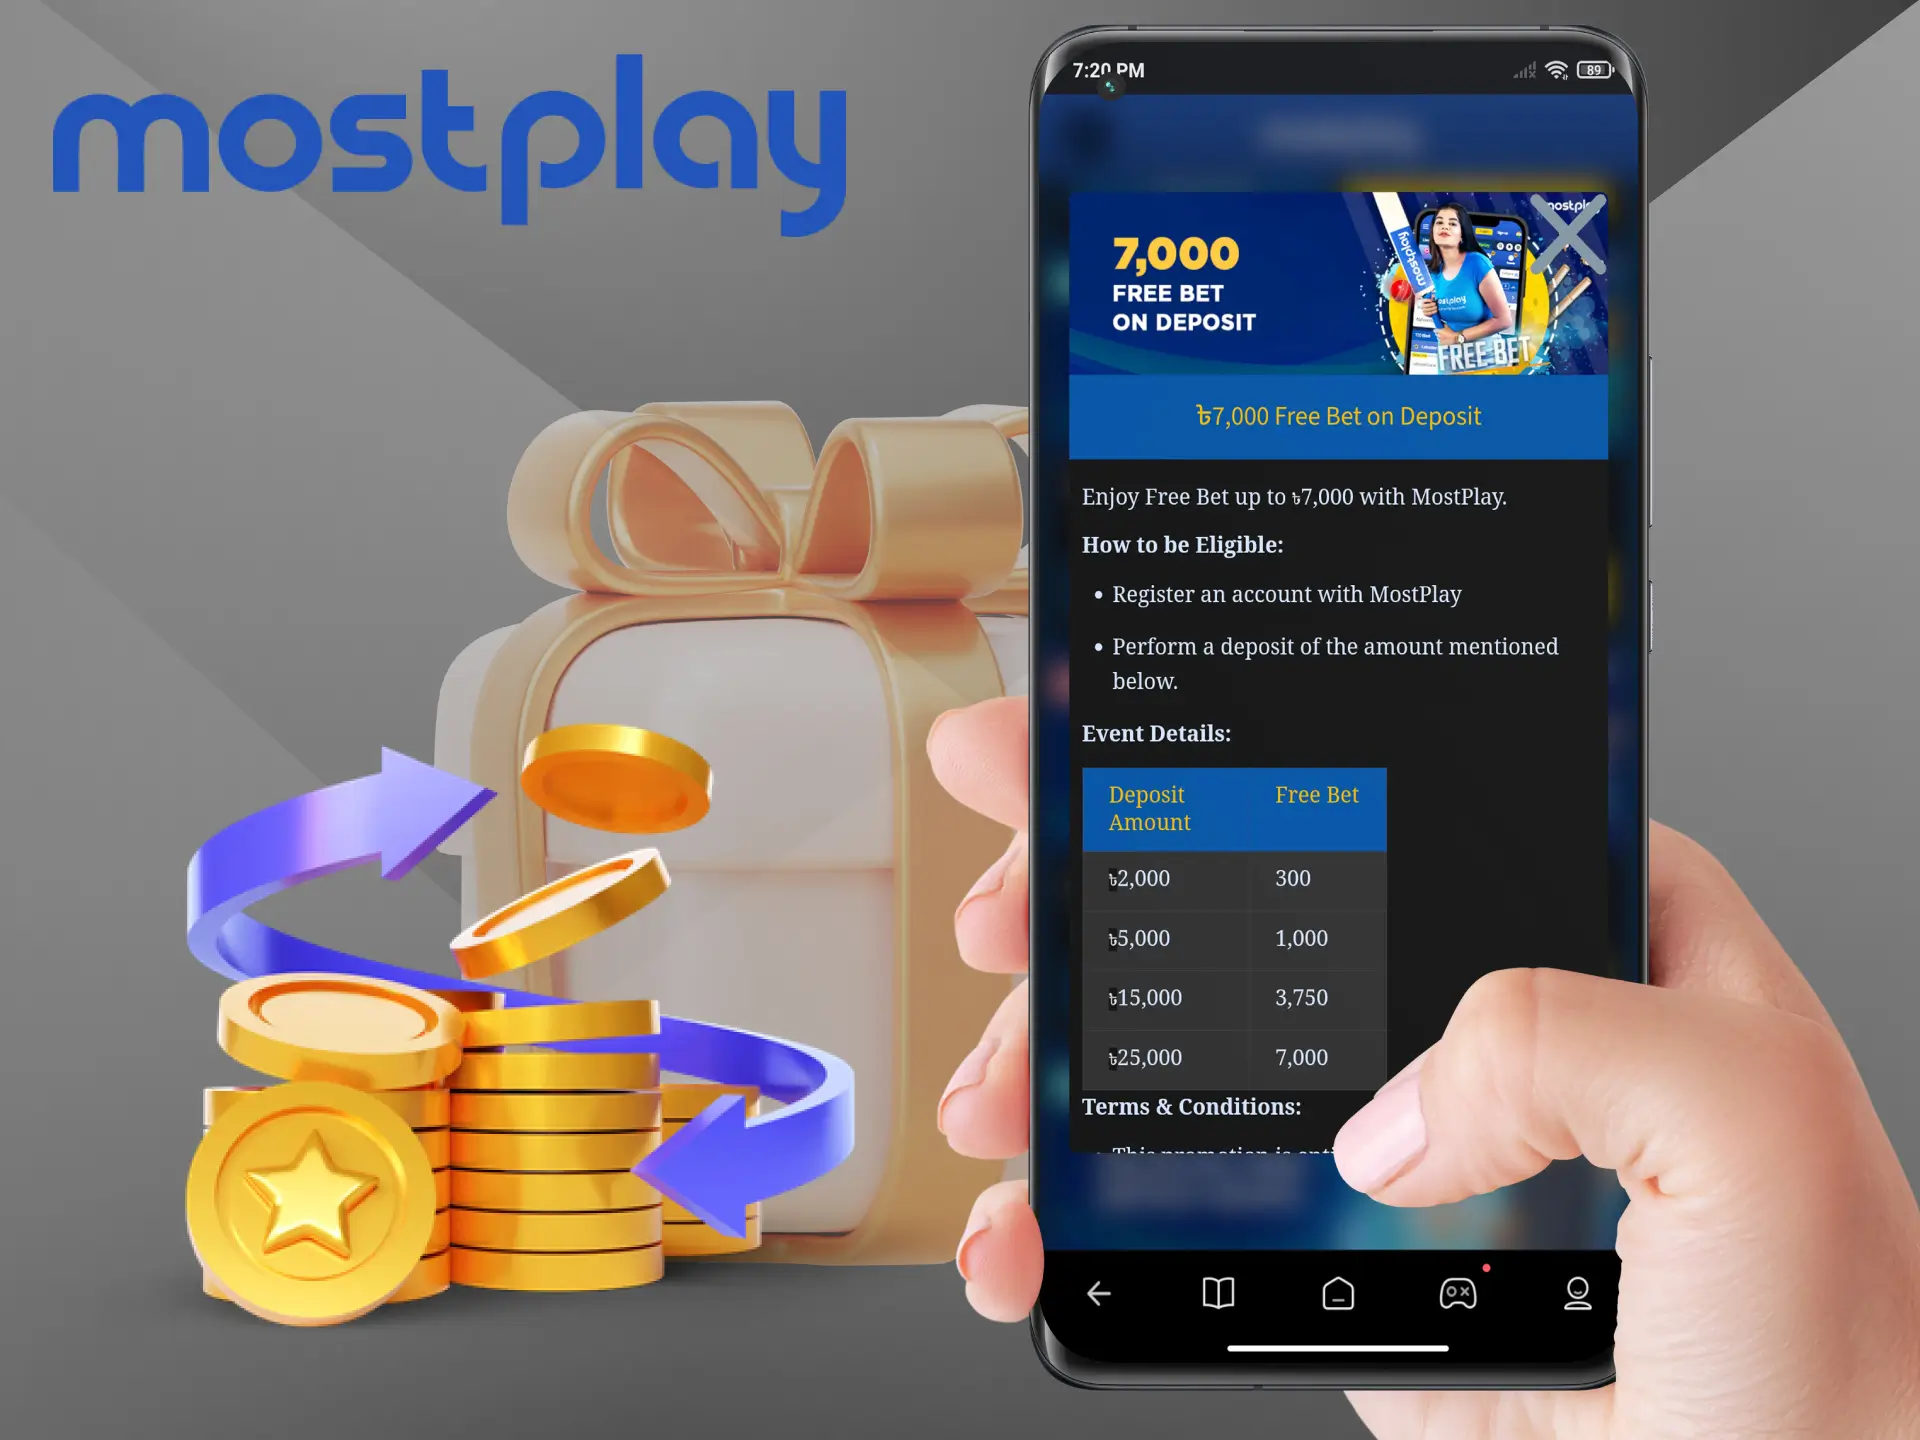 Take advantage of a unique bonus opportunity to bet on sports at Mostplay when you deposit.